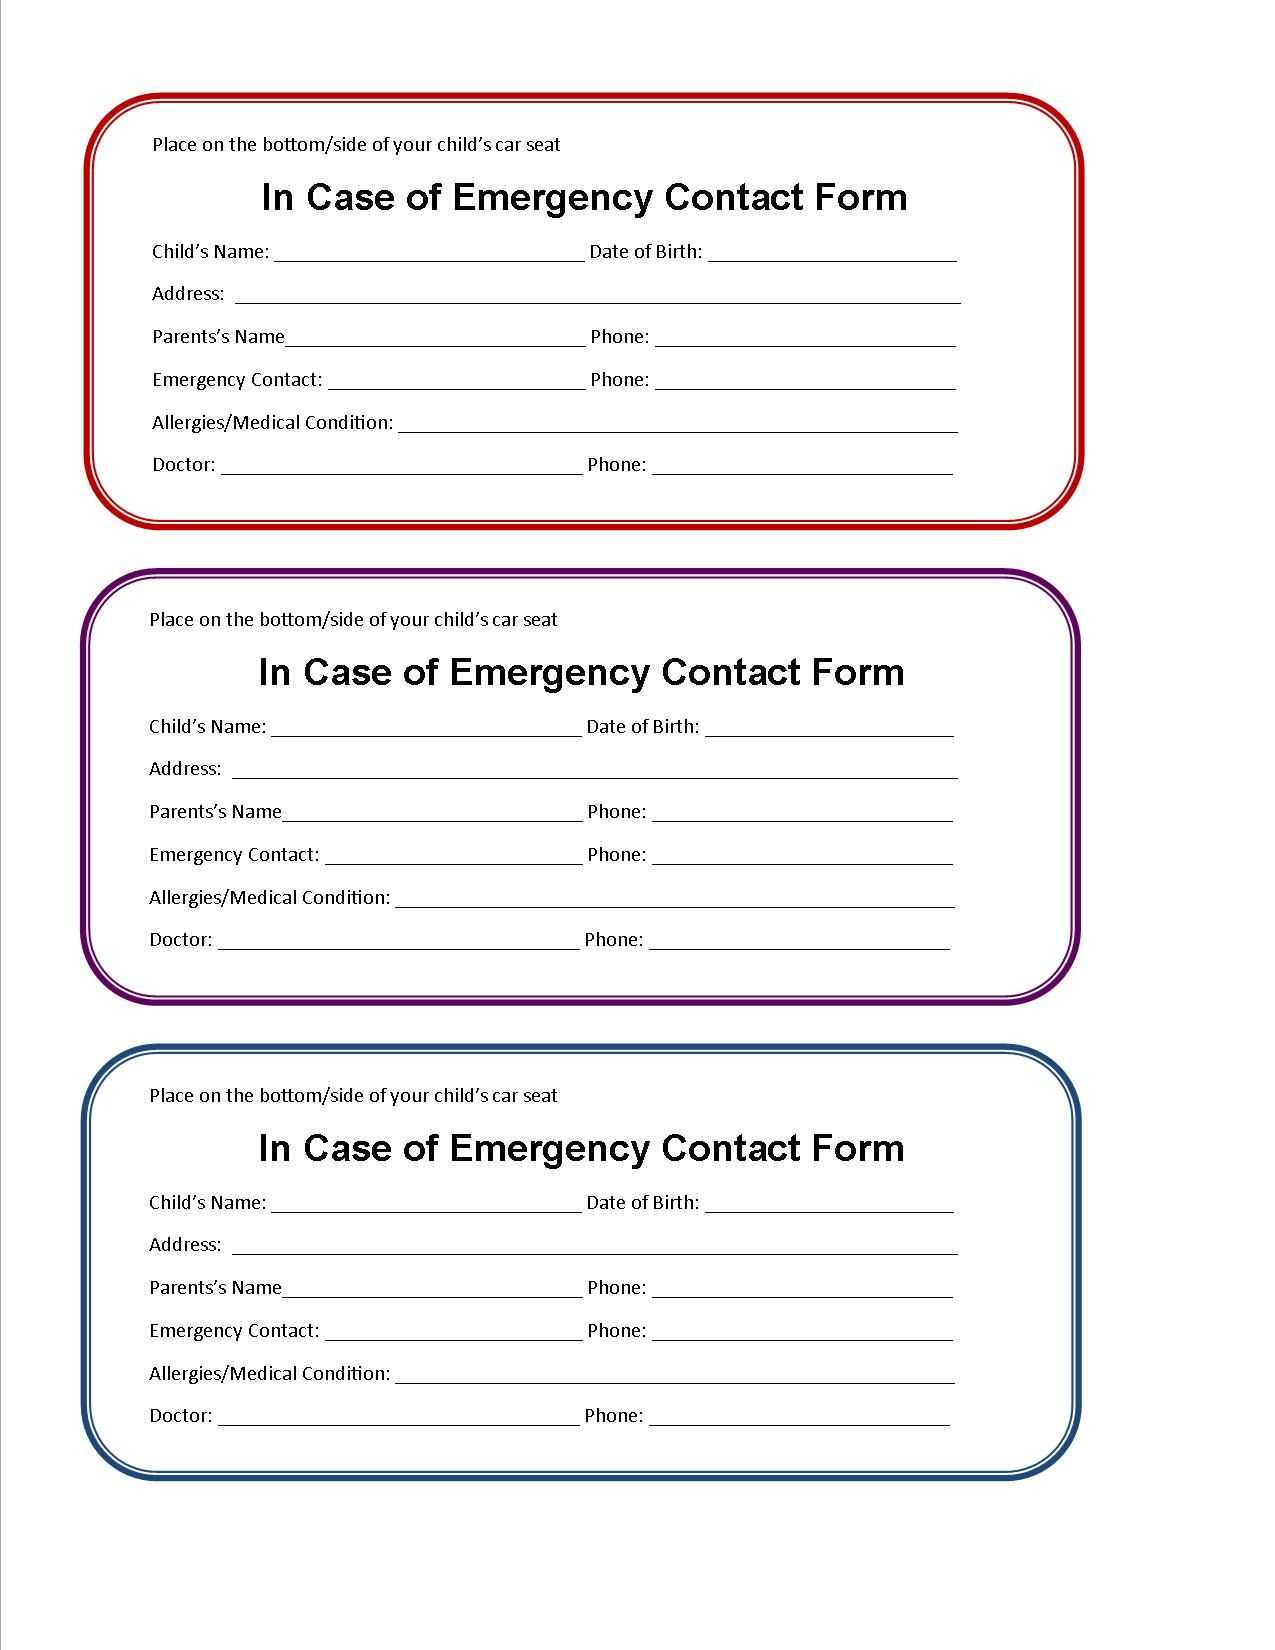 Printable Emergency Contact Form For Car Seat | Emergency Inside In Case Of Emergency Card Template